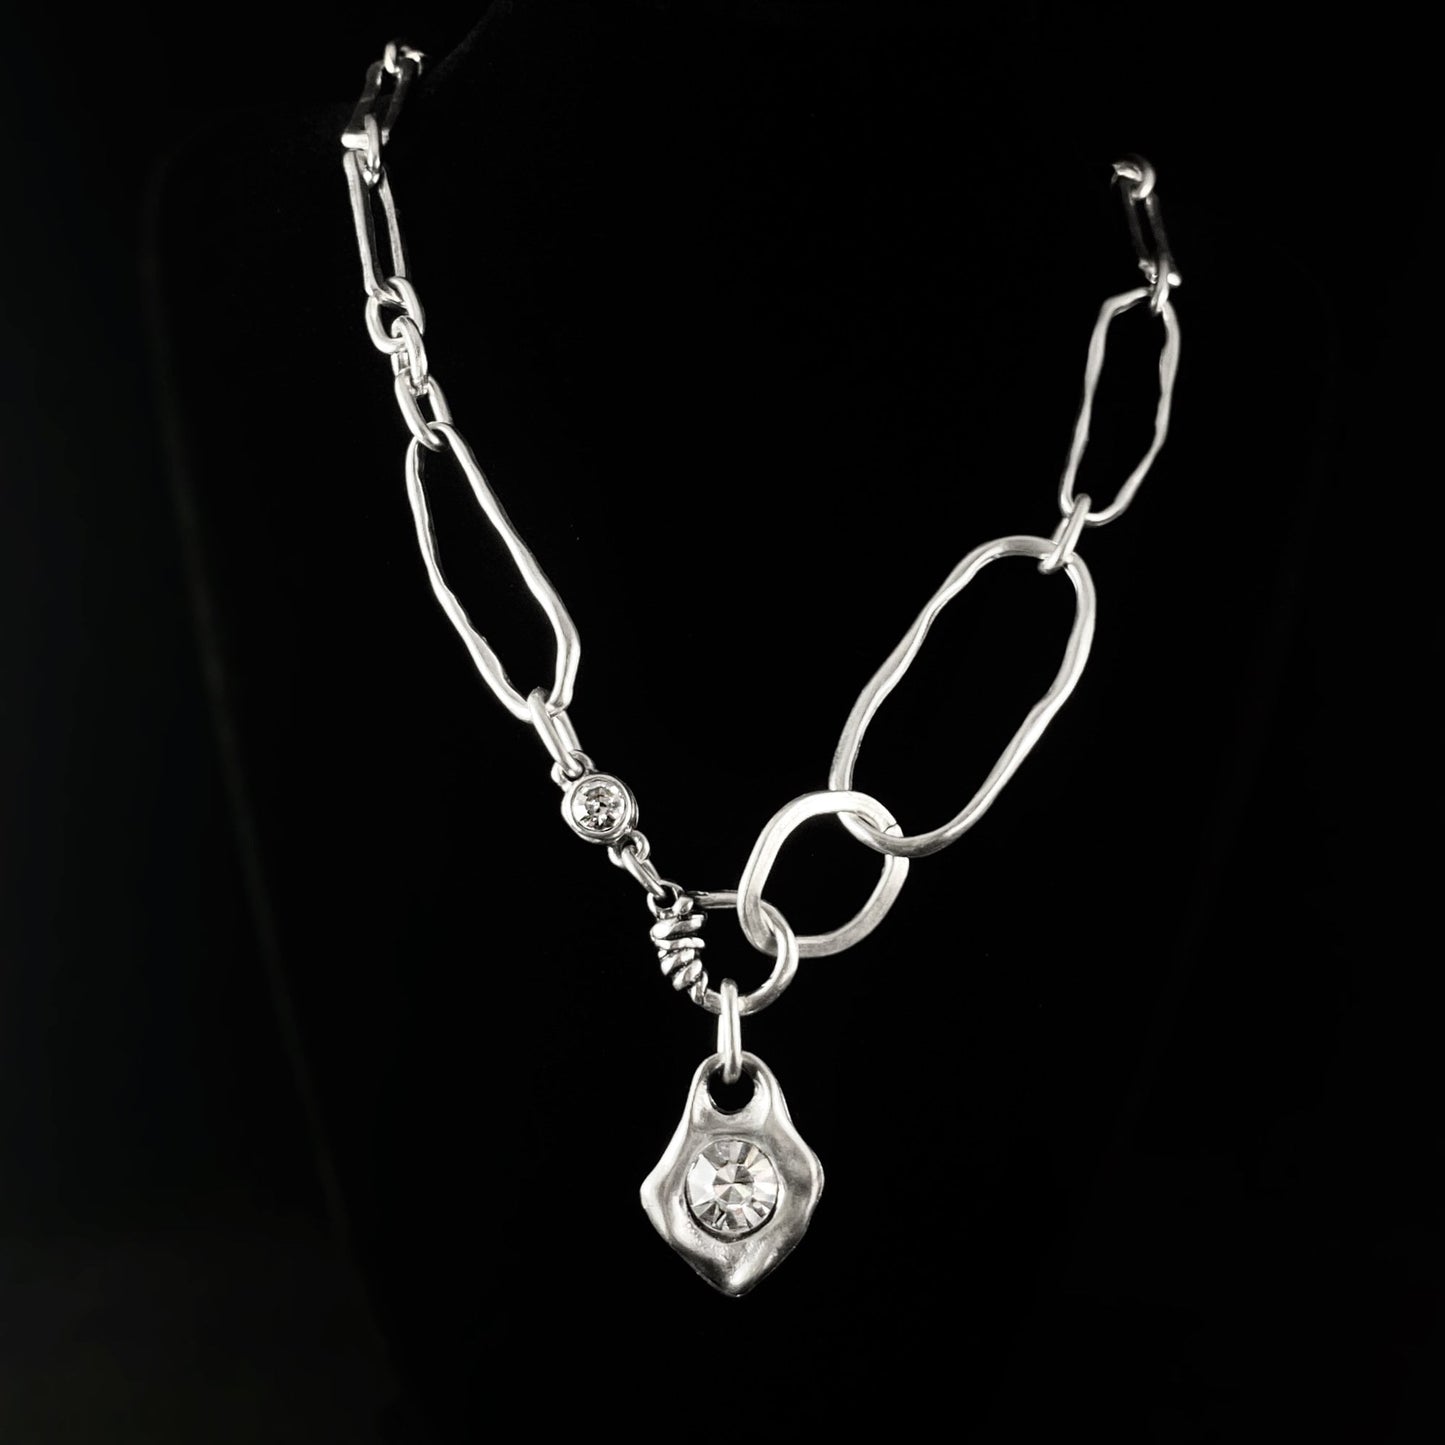 Silver Chain Link Abstract Necklace With Crystal Pendant and Crystal Accent, Handmade, Nickel Free-Noir